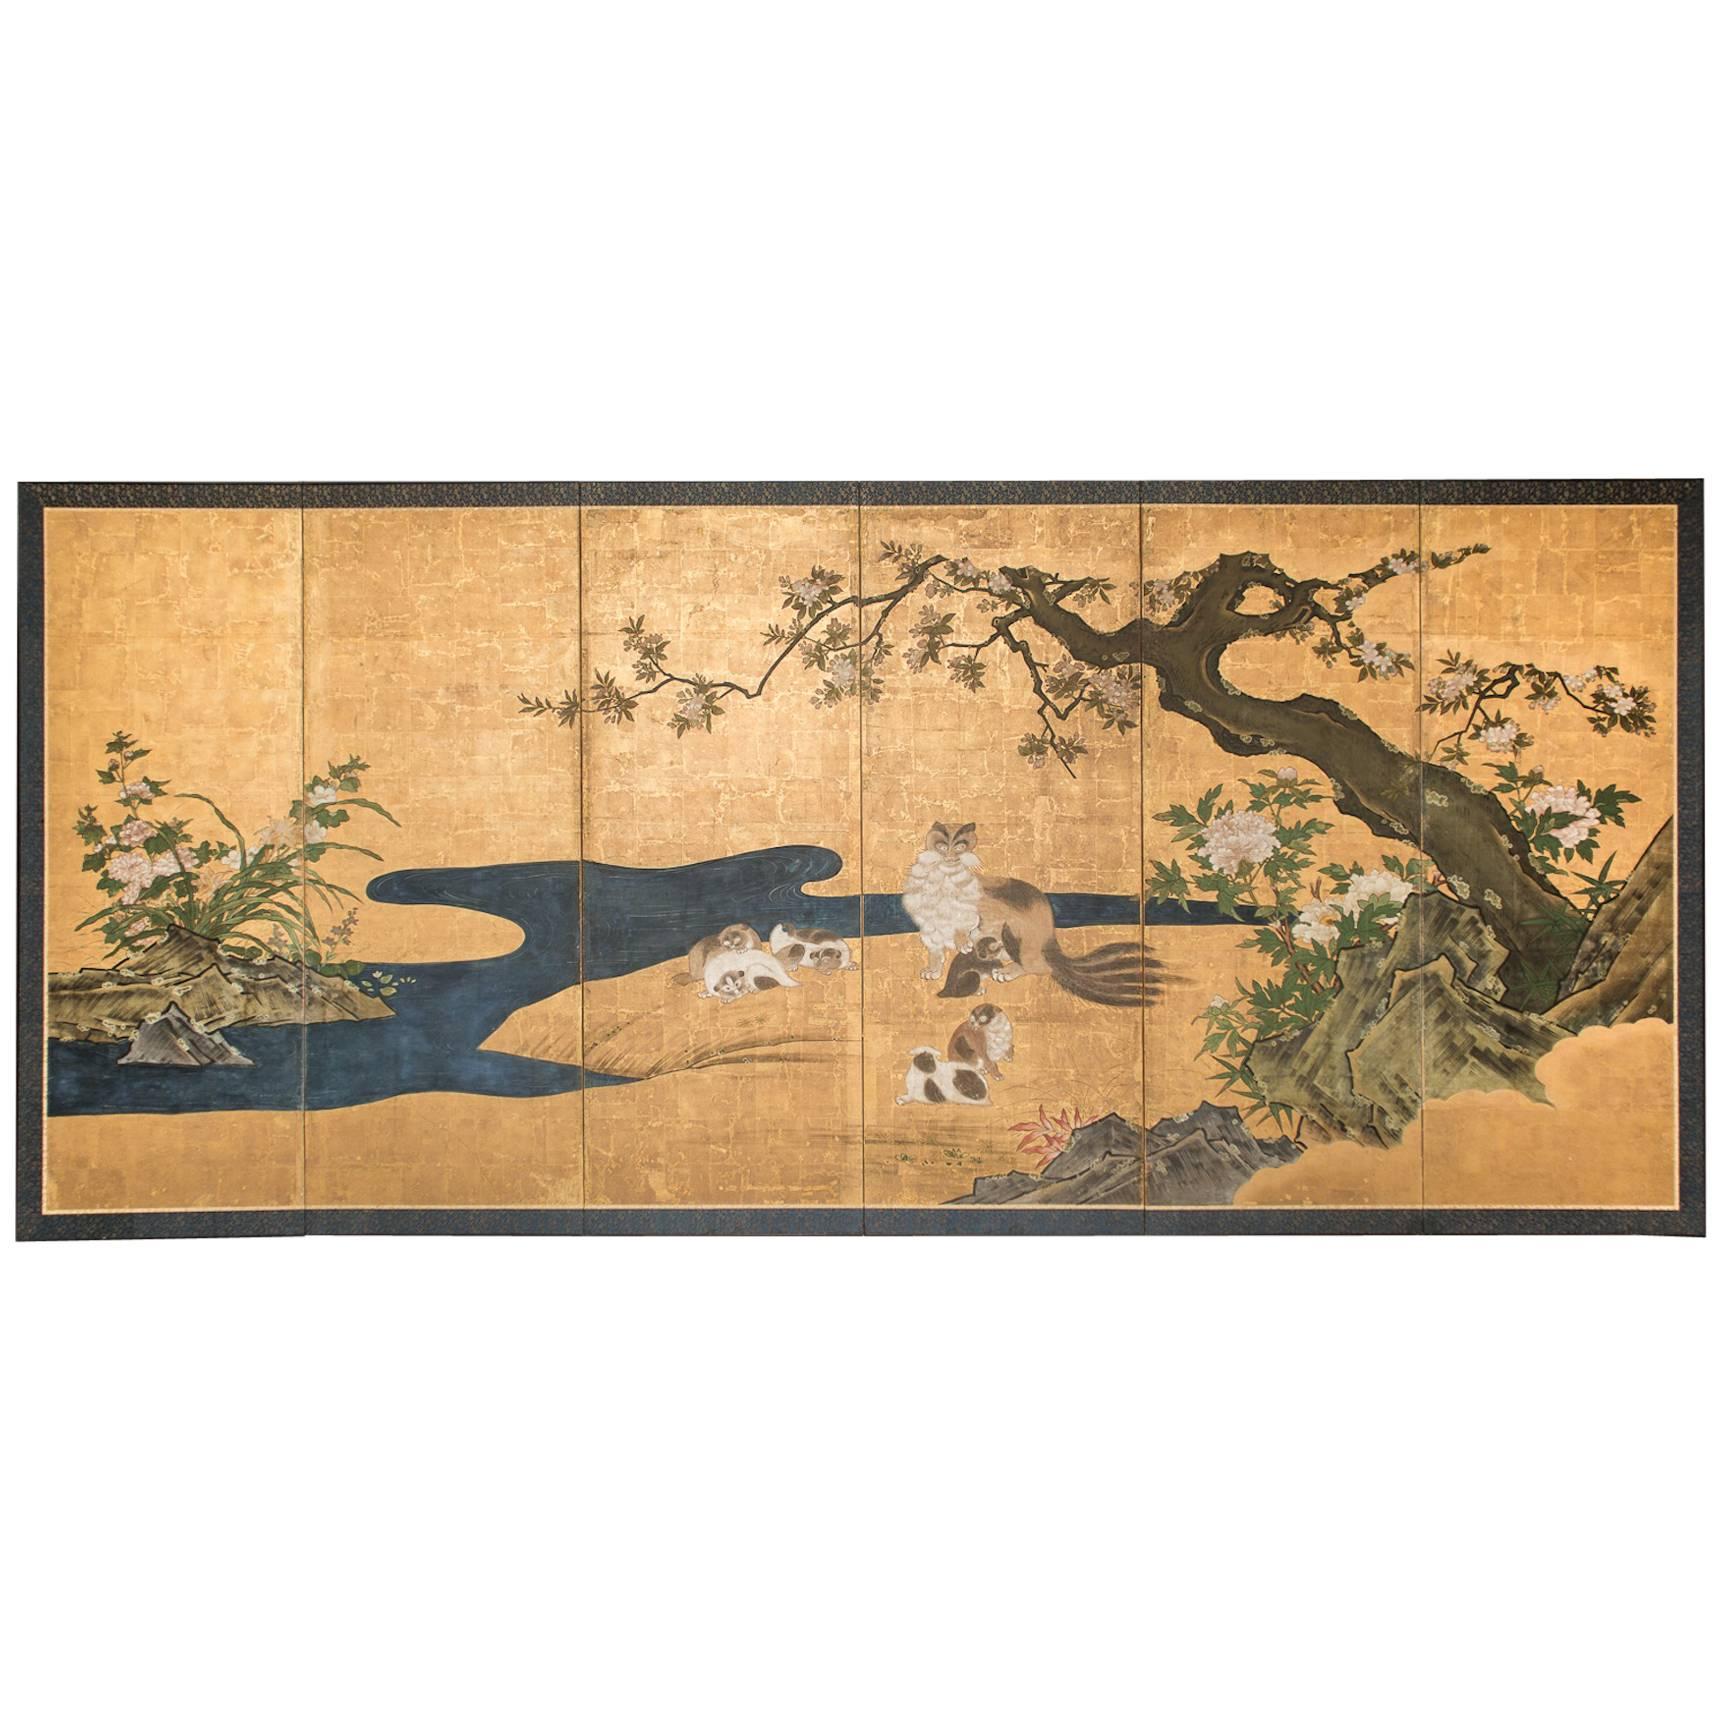 Japanese Six-Panel Screen "Mother and Her Kittens"